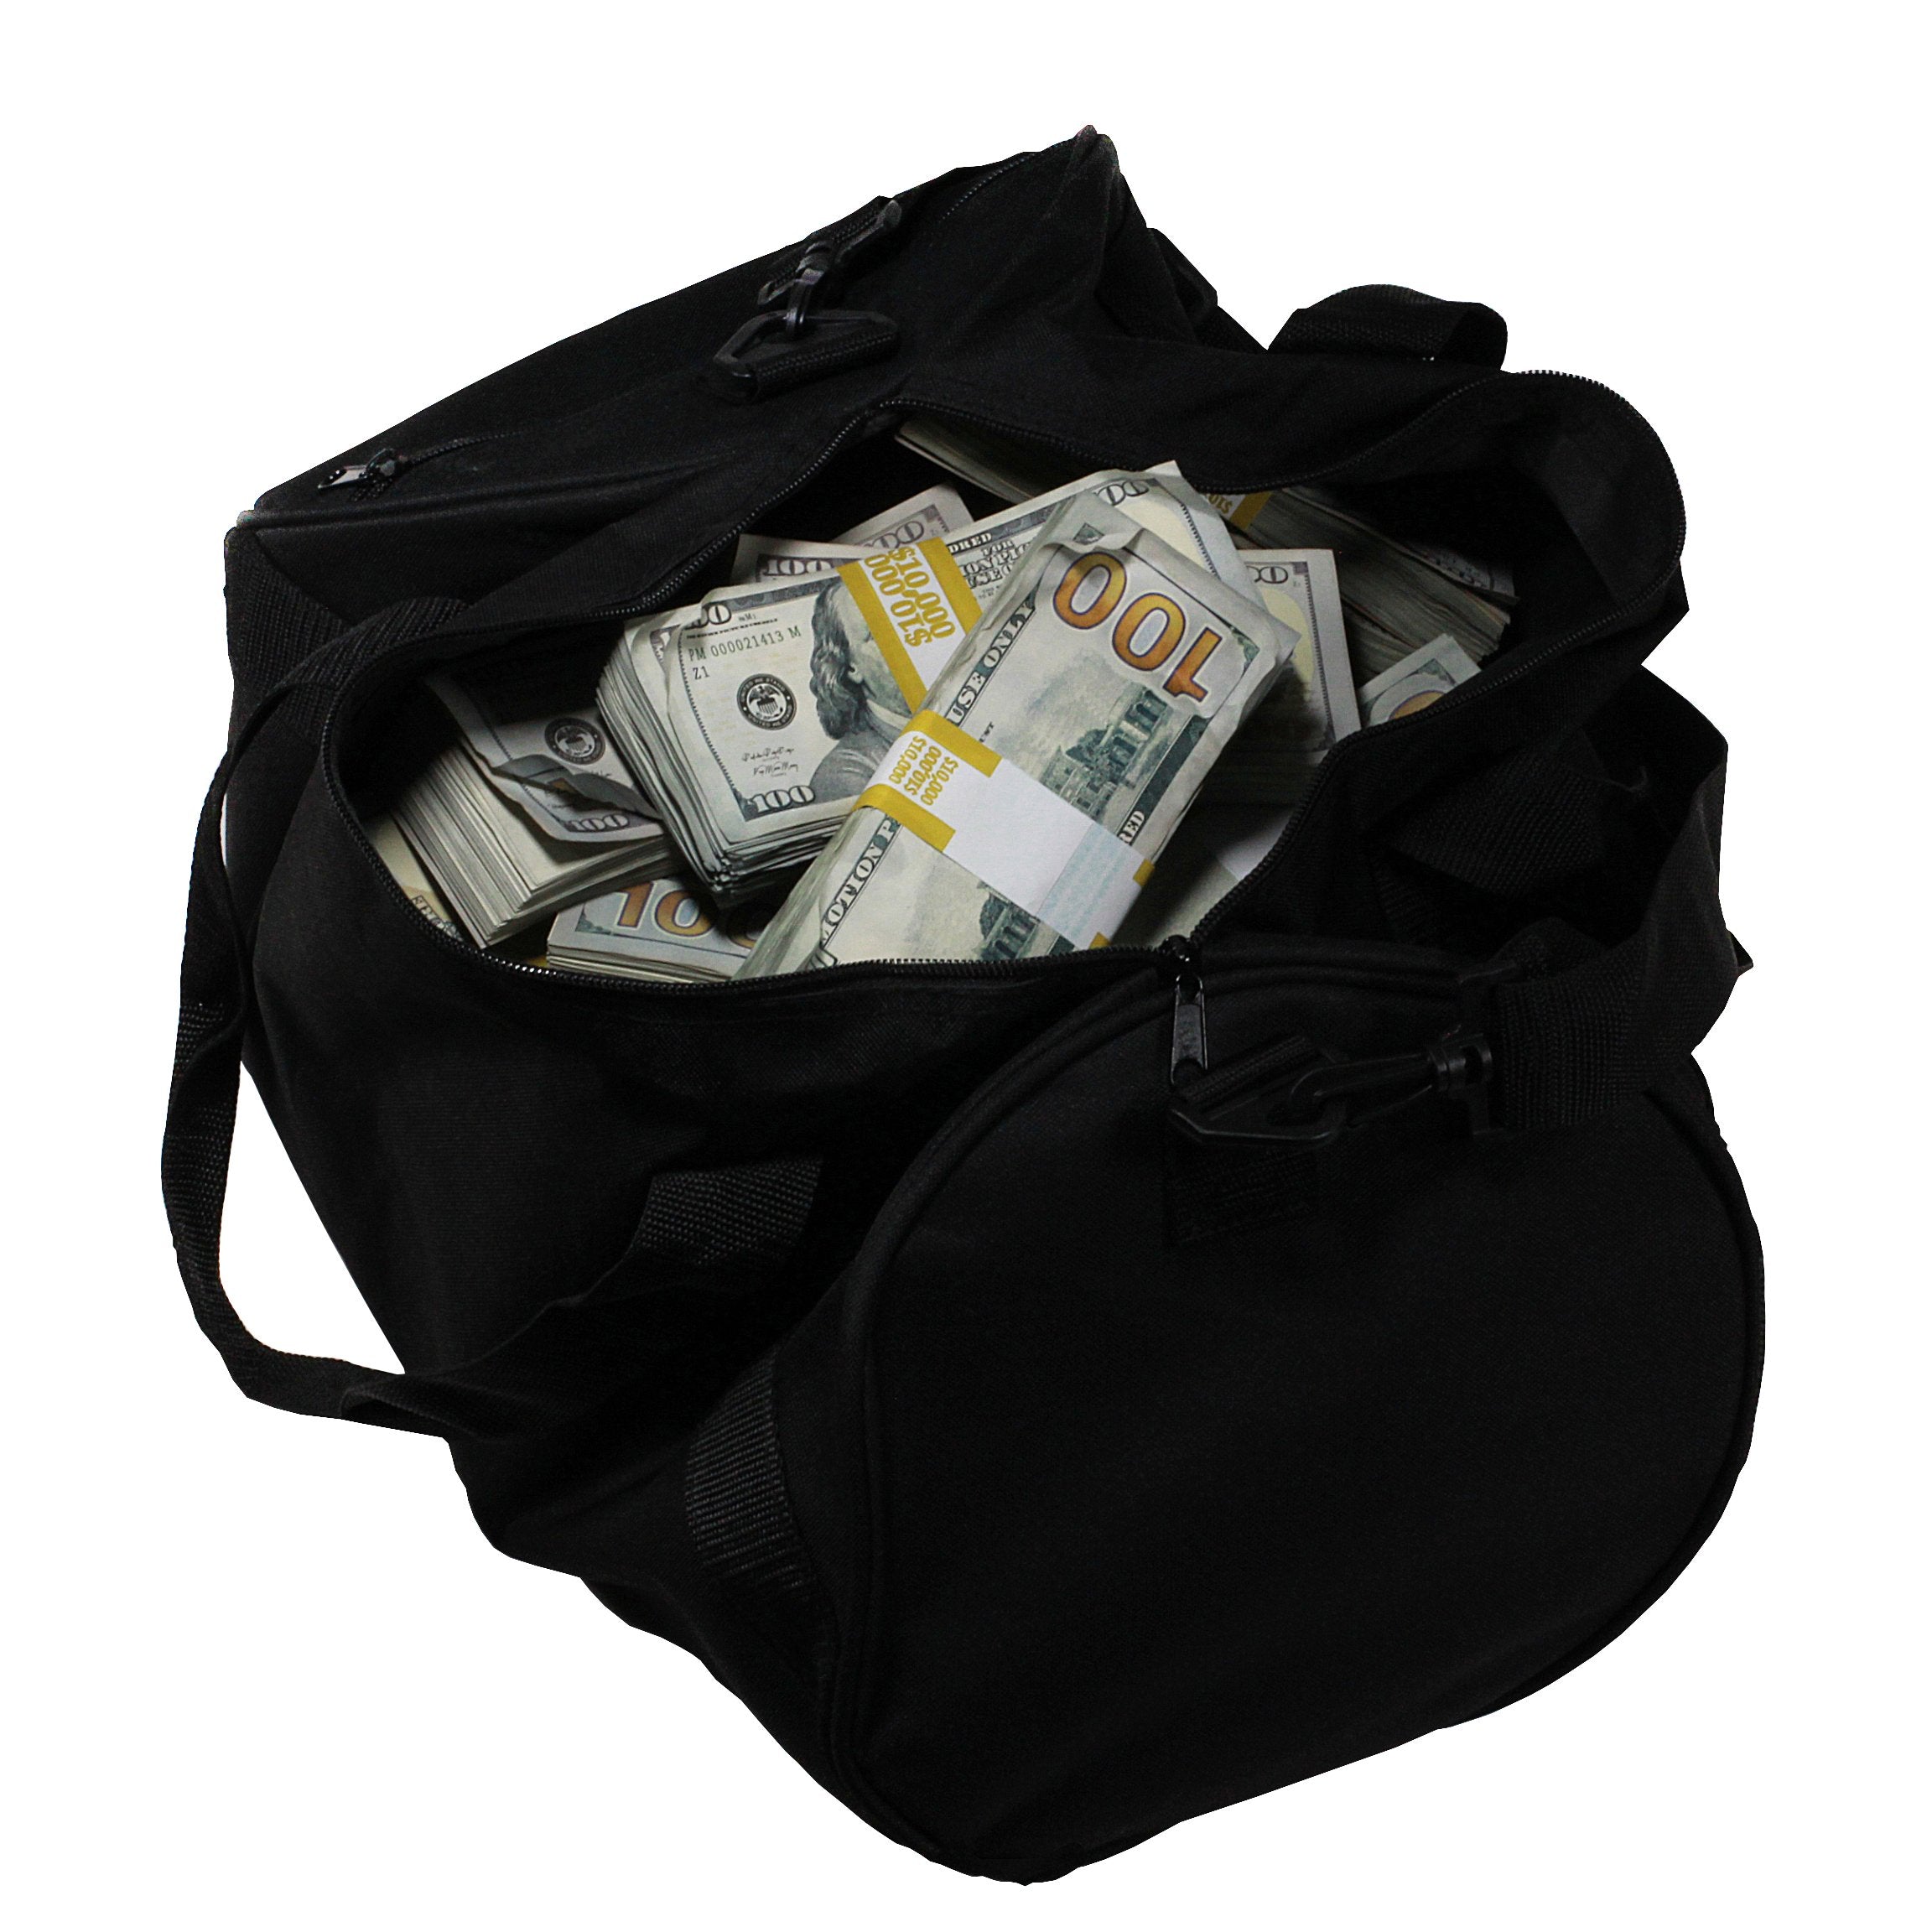 Studio Space Atlanta - JUST IN! Duffel bag full of money Prop. It gets  expensive putting this together yourself with all the prop money it takes  to fill it, we have this